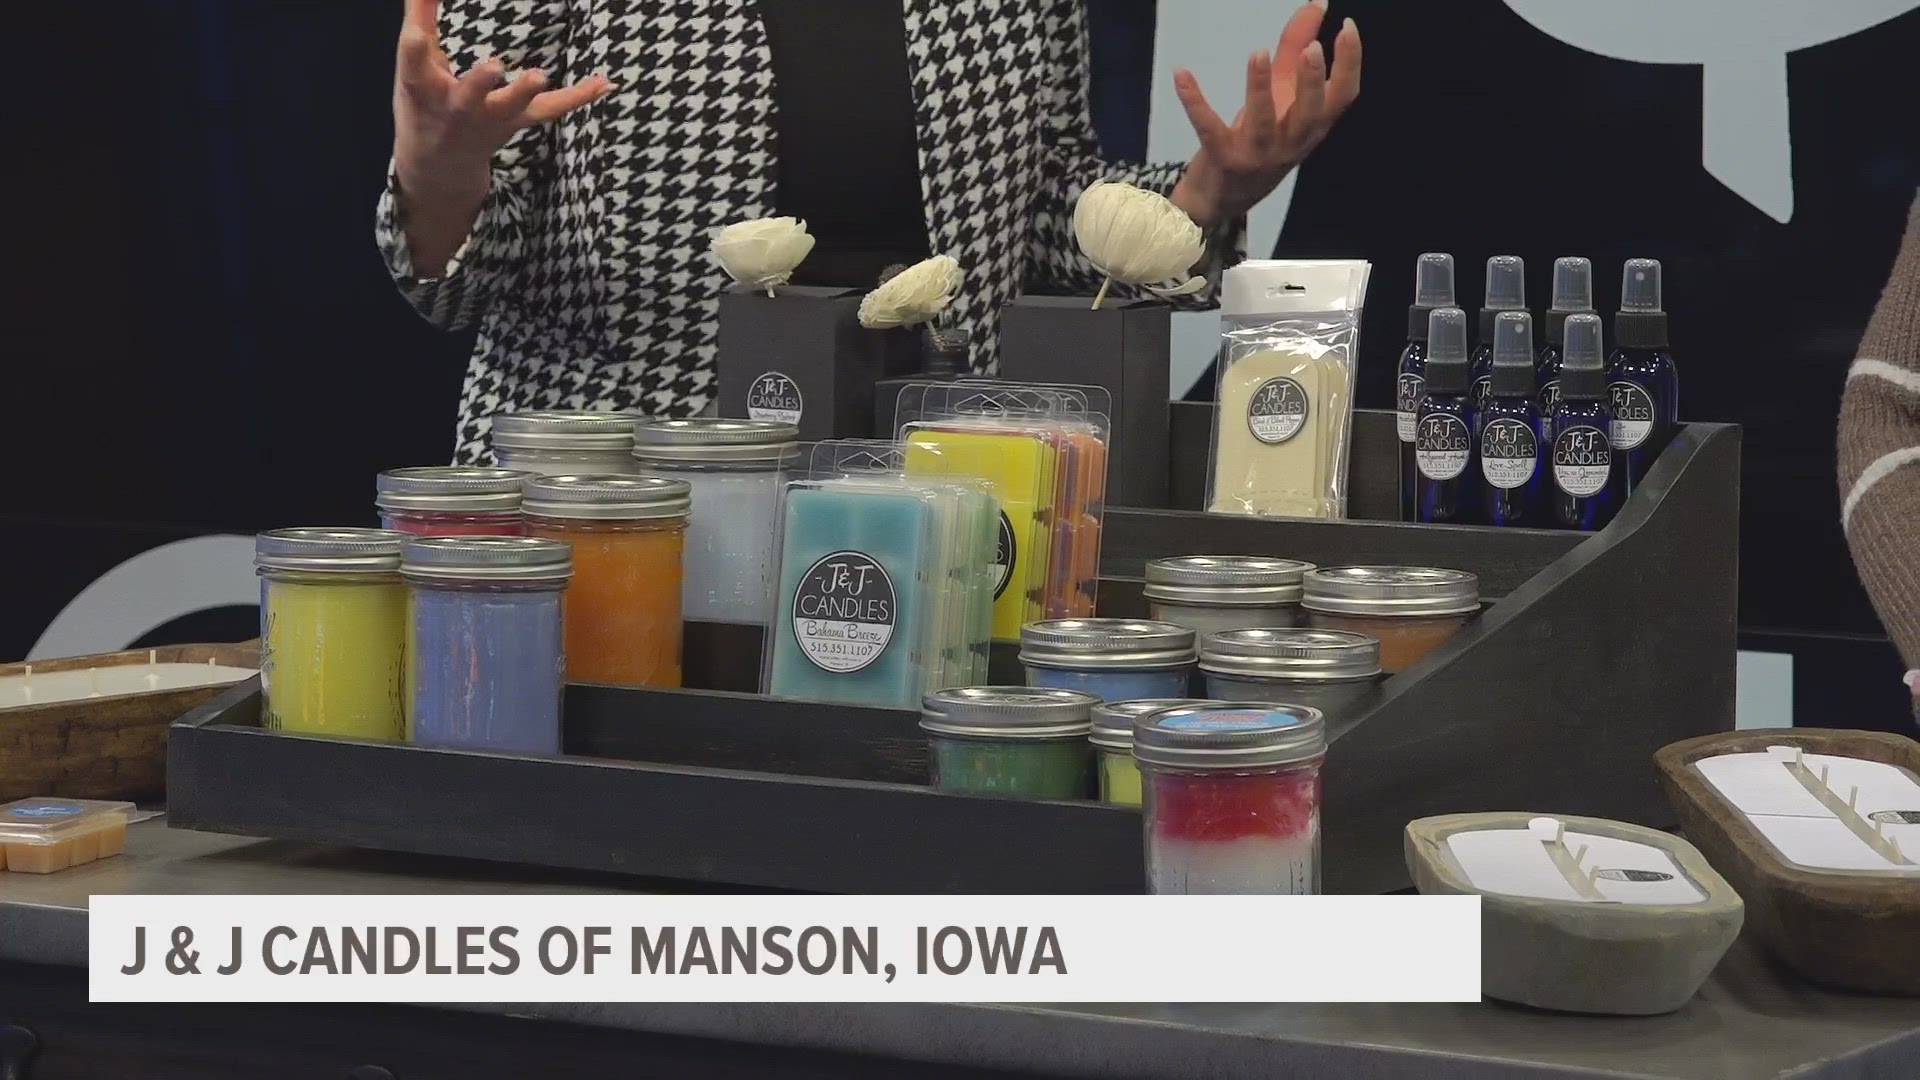 J&J Candles is creating wonderful — and in some cases, nostalgic — candle scents.